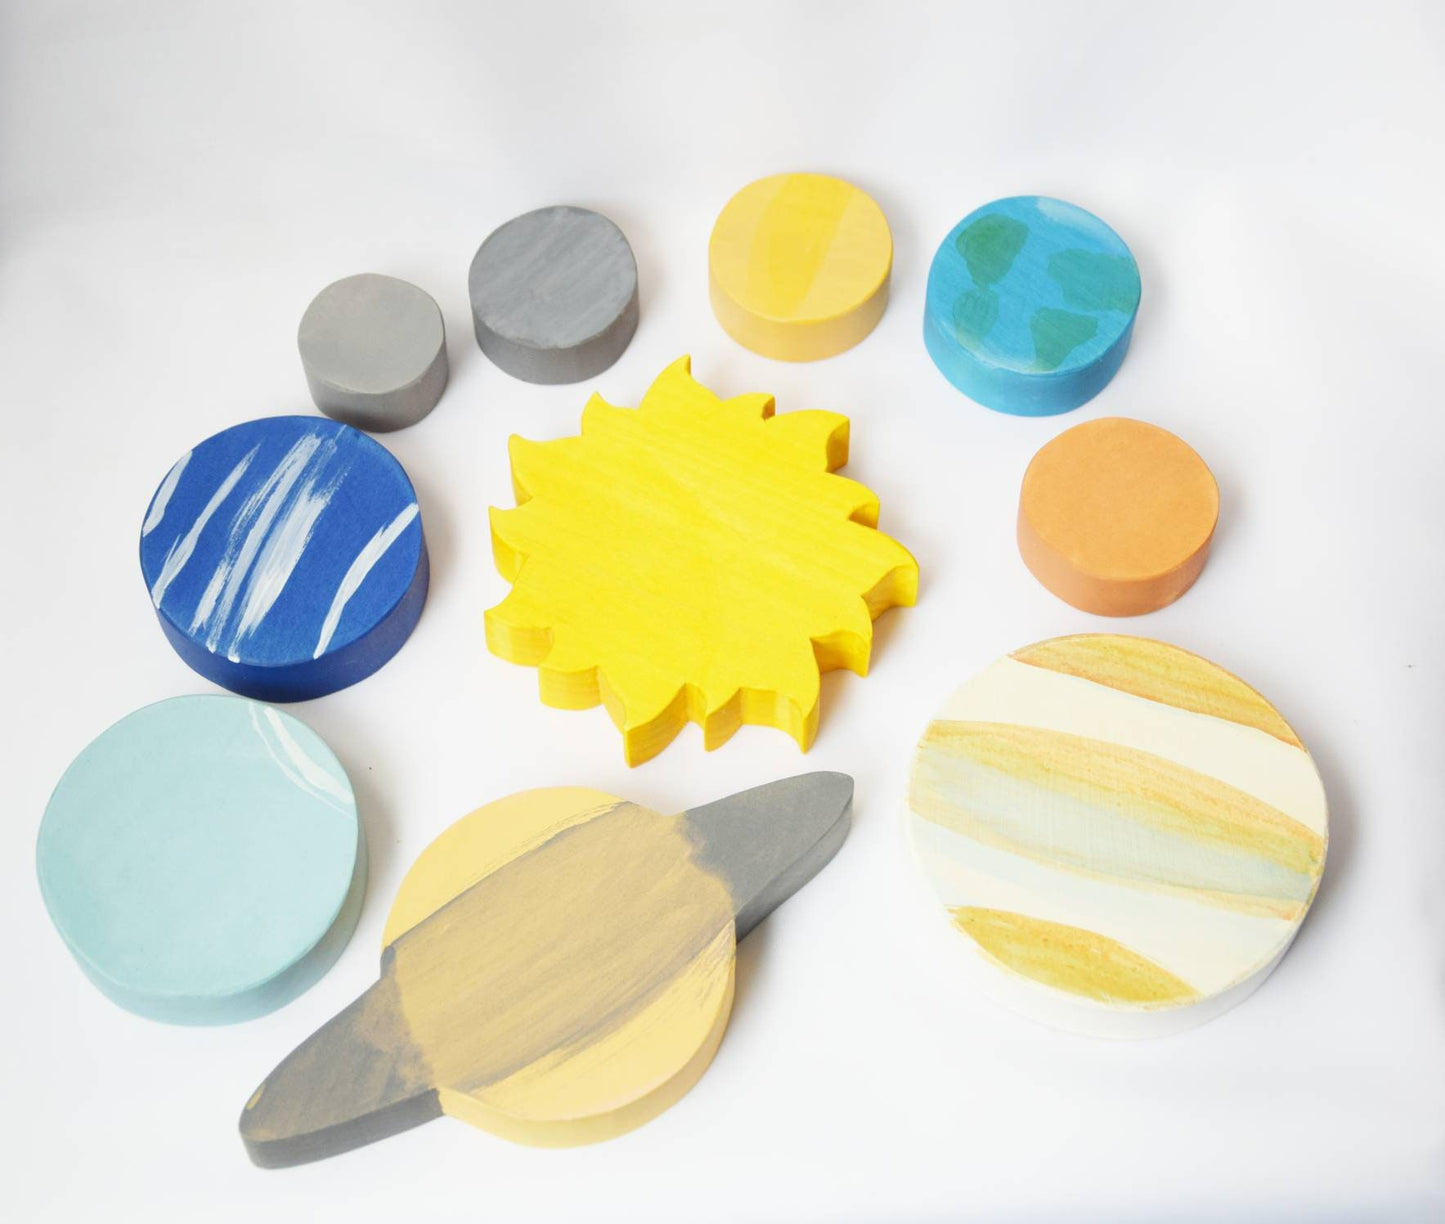 solar system wooden toy set, planets, waldorf inspired, homeschool, montessori, astronomy toy set, gift for kids, christmas present, toy set